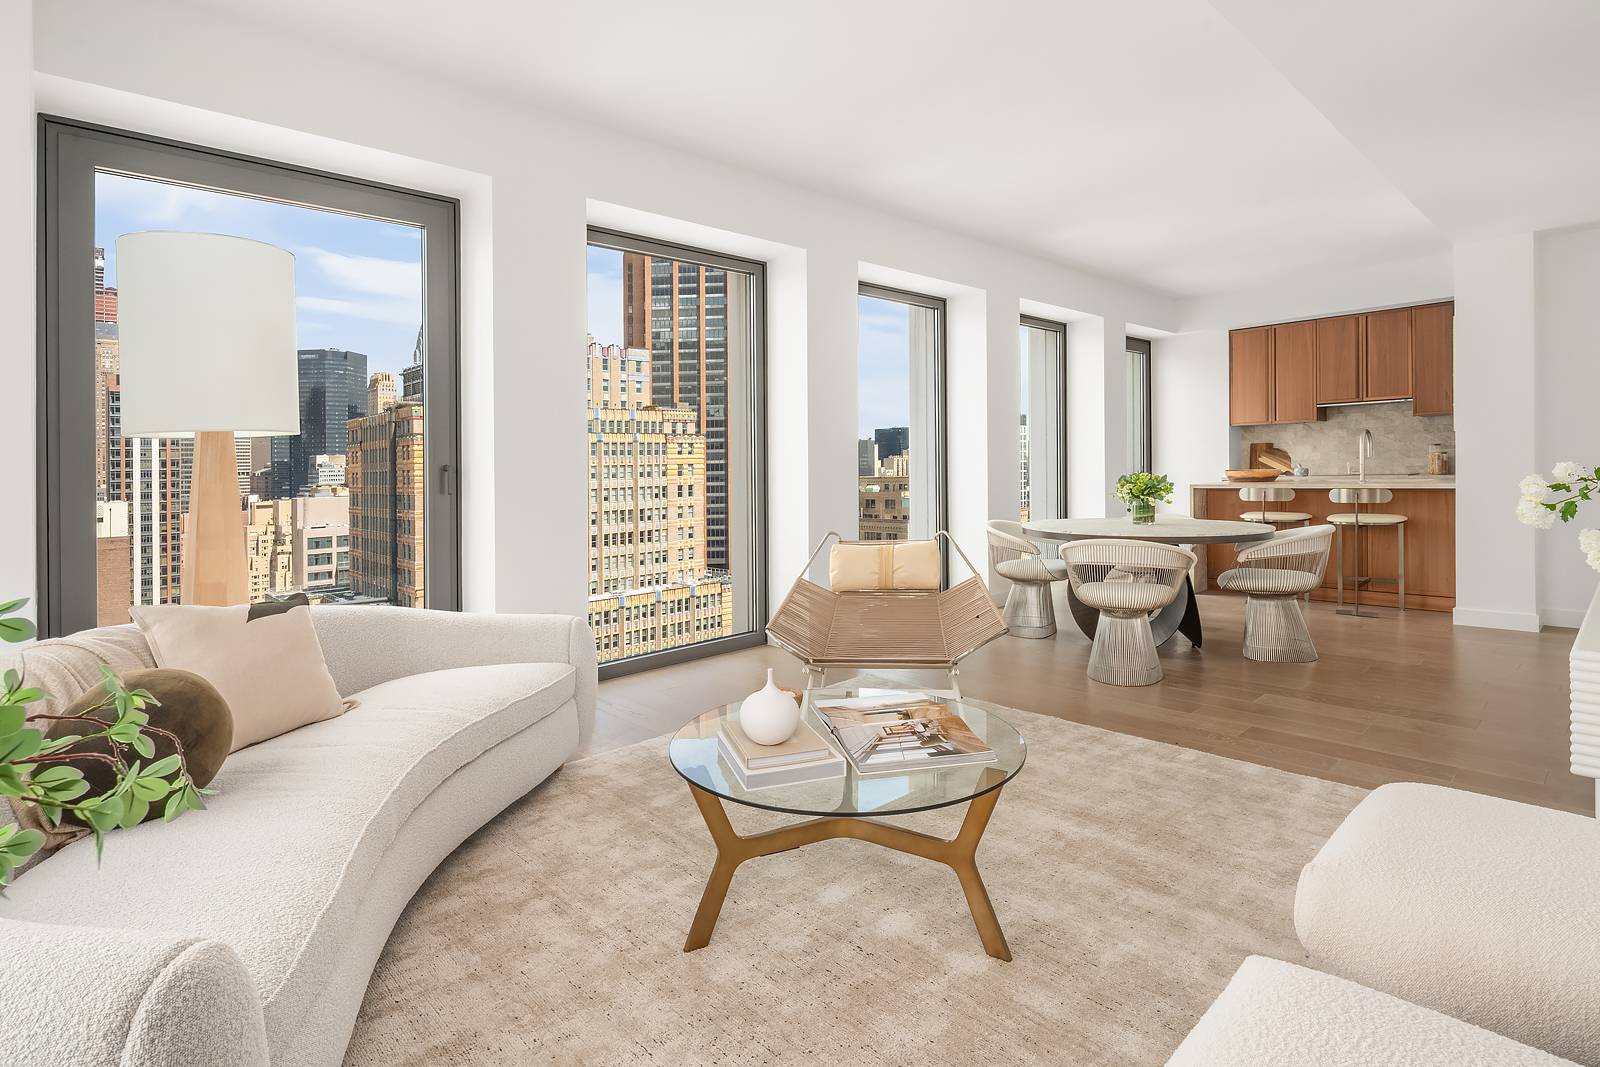 A blend of crisp, contemporary form with carefully considered function, the residences at 30 East 31st Street represent the pinnacle of quintessential Manhattan living.